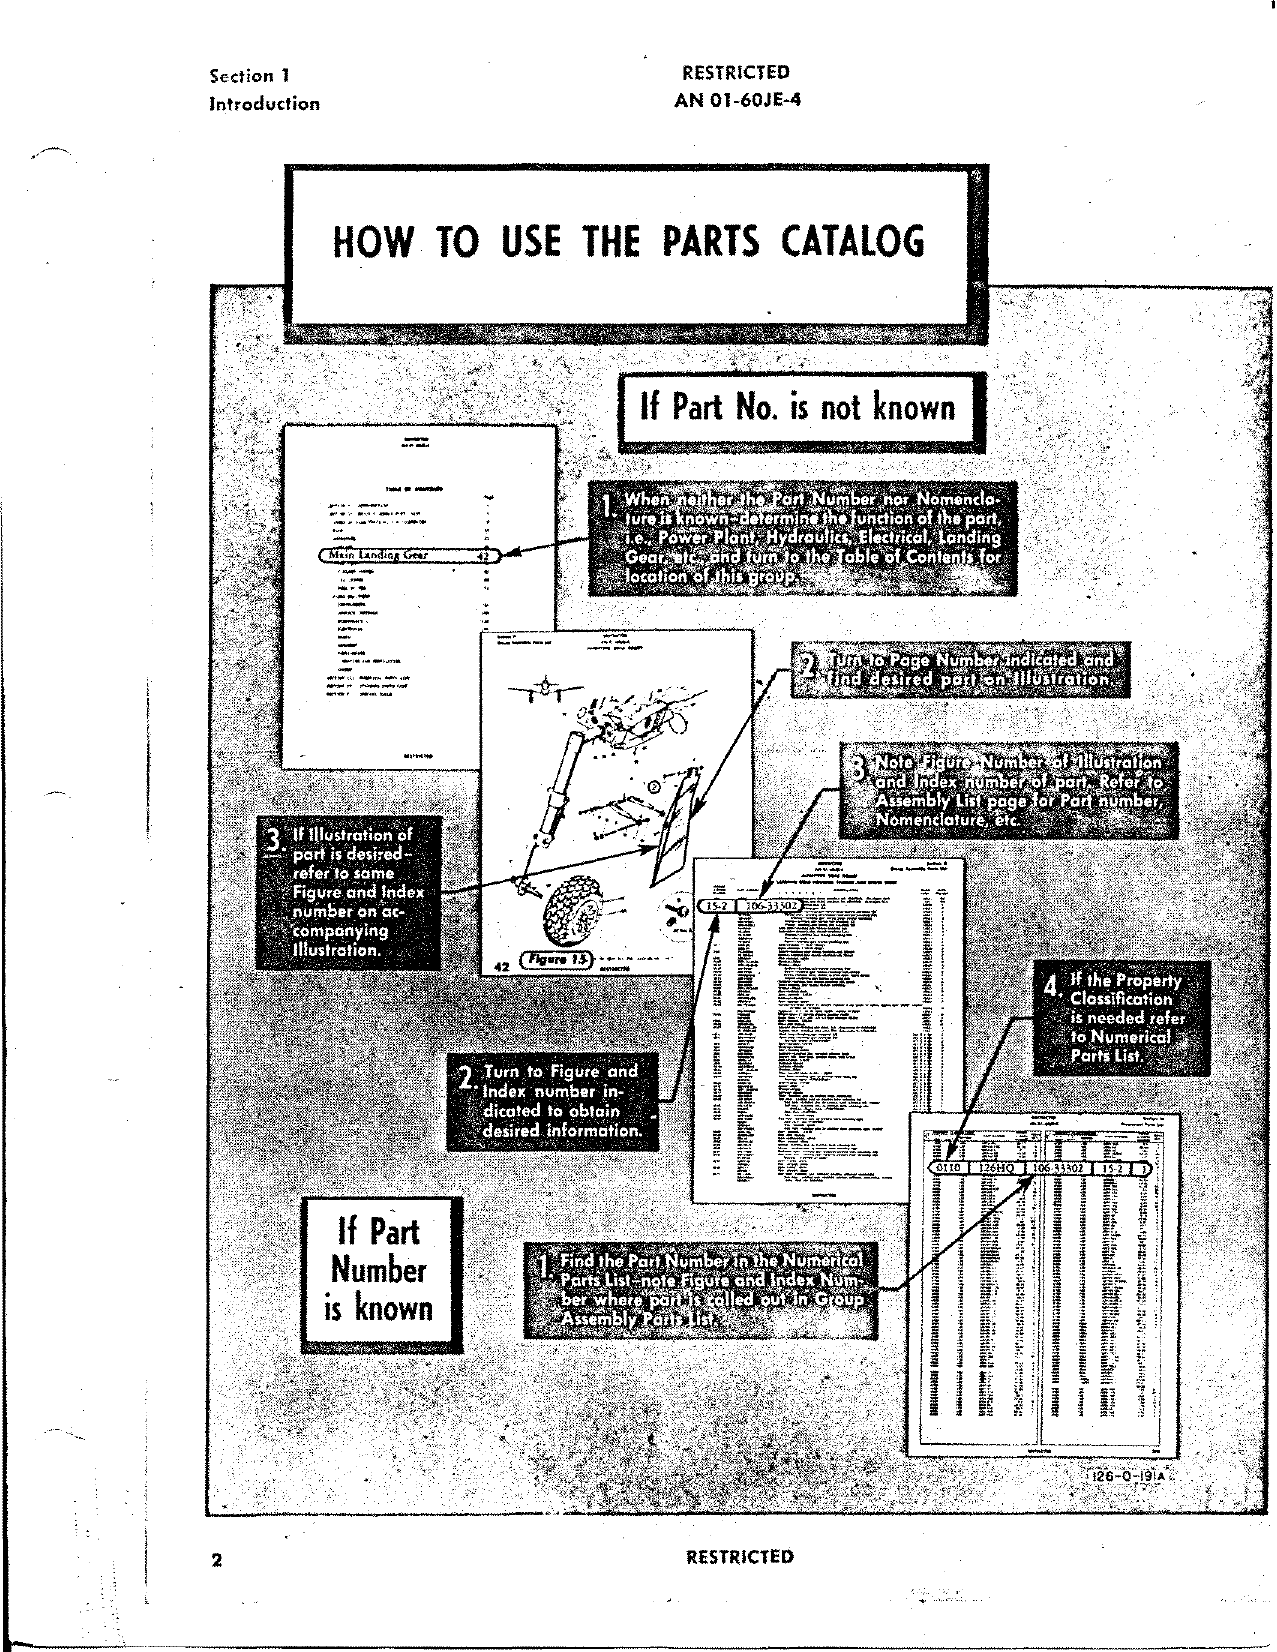 Sample page 6 from AirCorps Library document: Parts Catalog for P-51D and P-51K